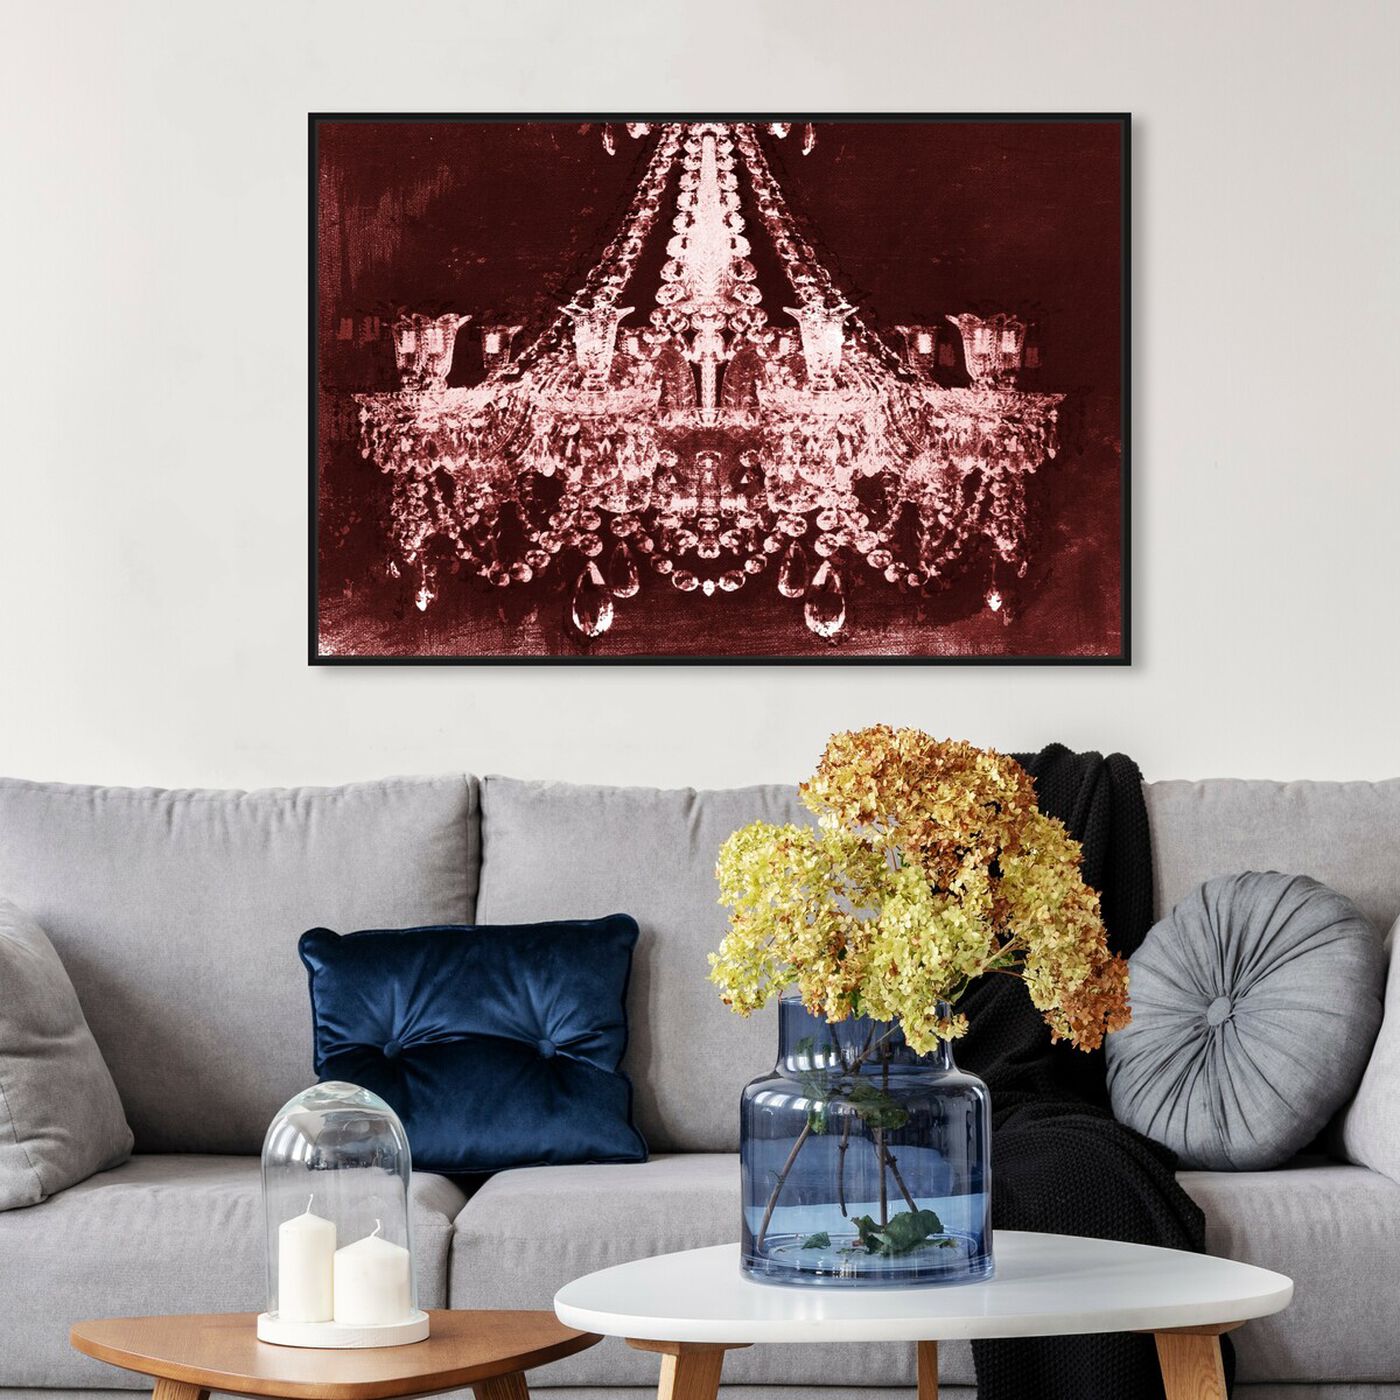 Hanging view of Dramatic Entrance Poison Apple II featuring fashion and glam and chandeliers art.